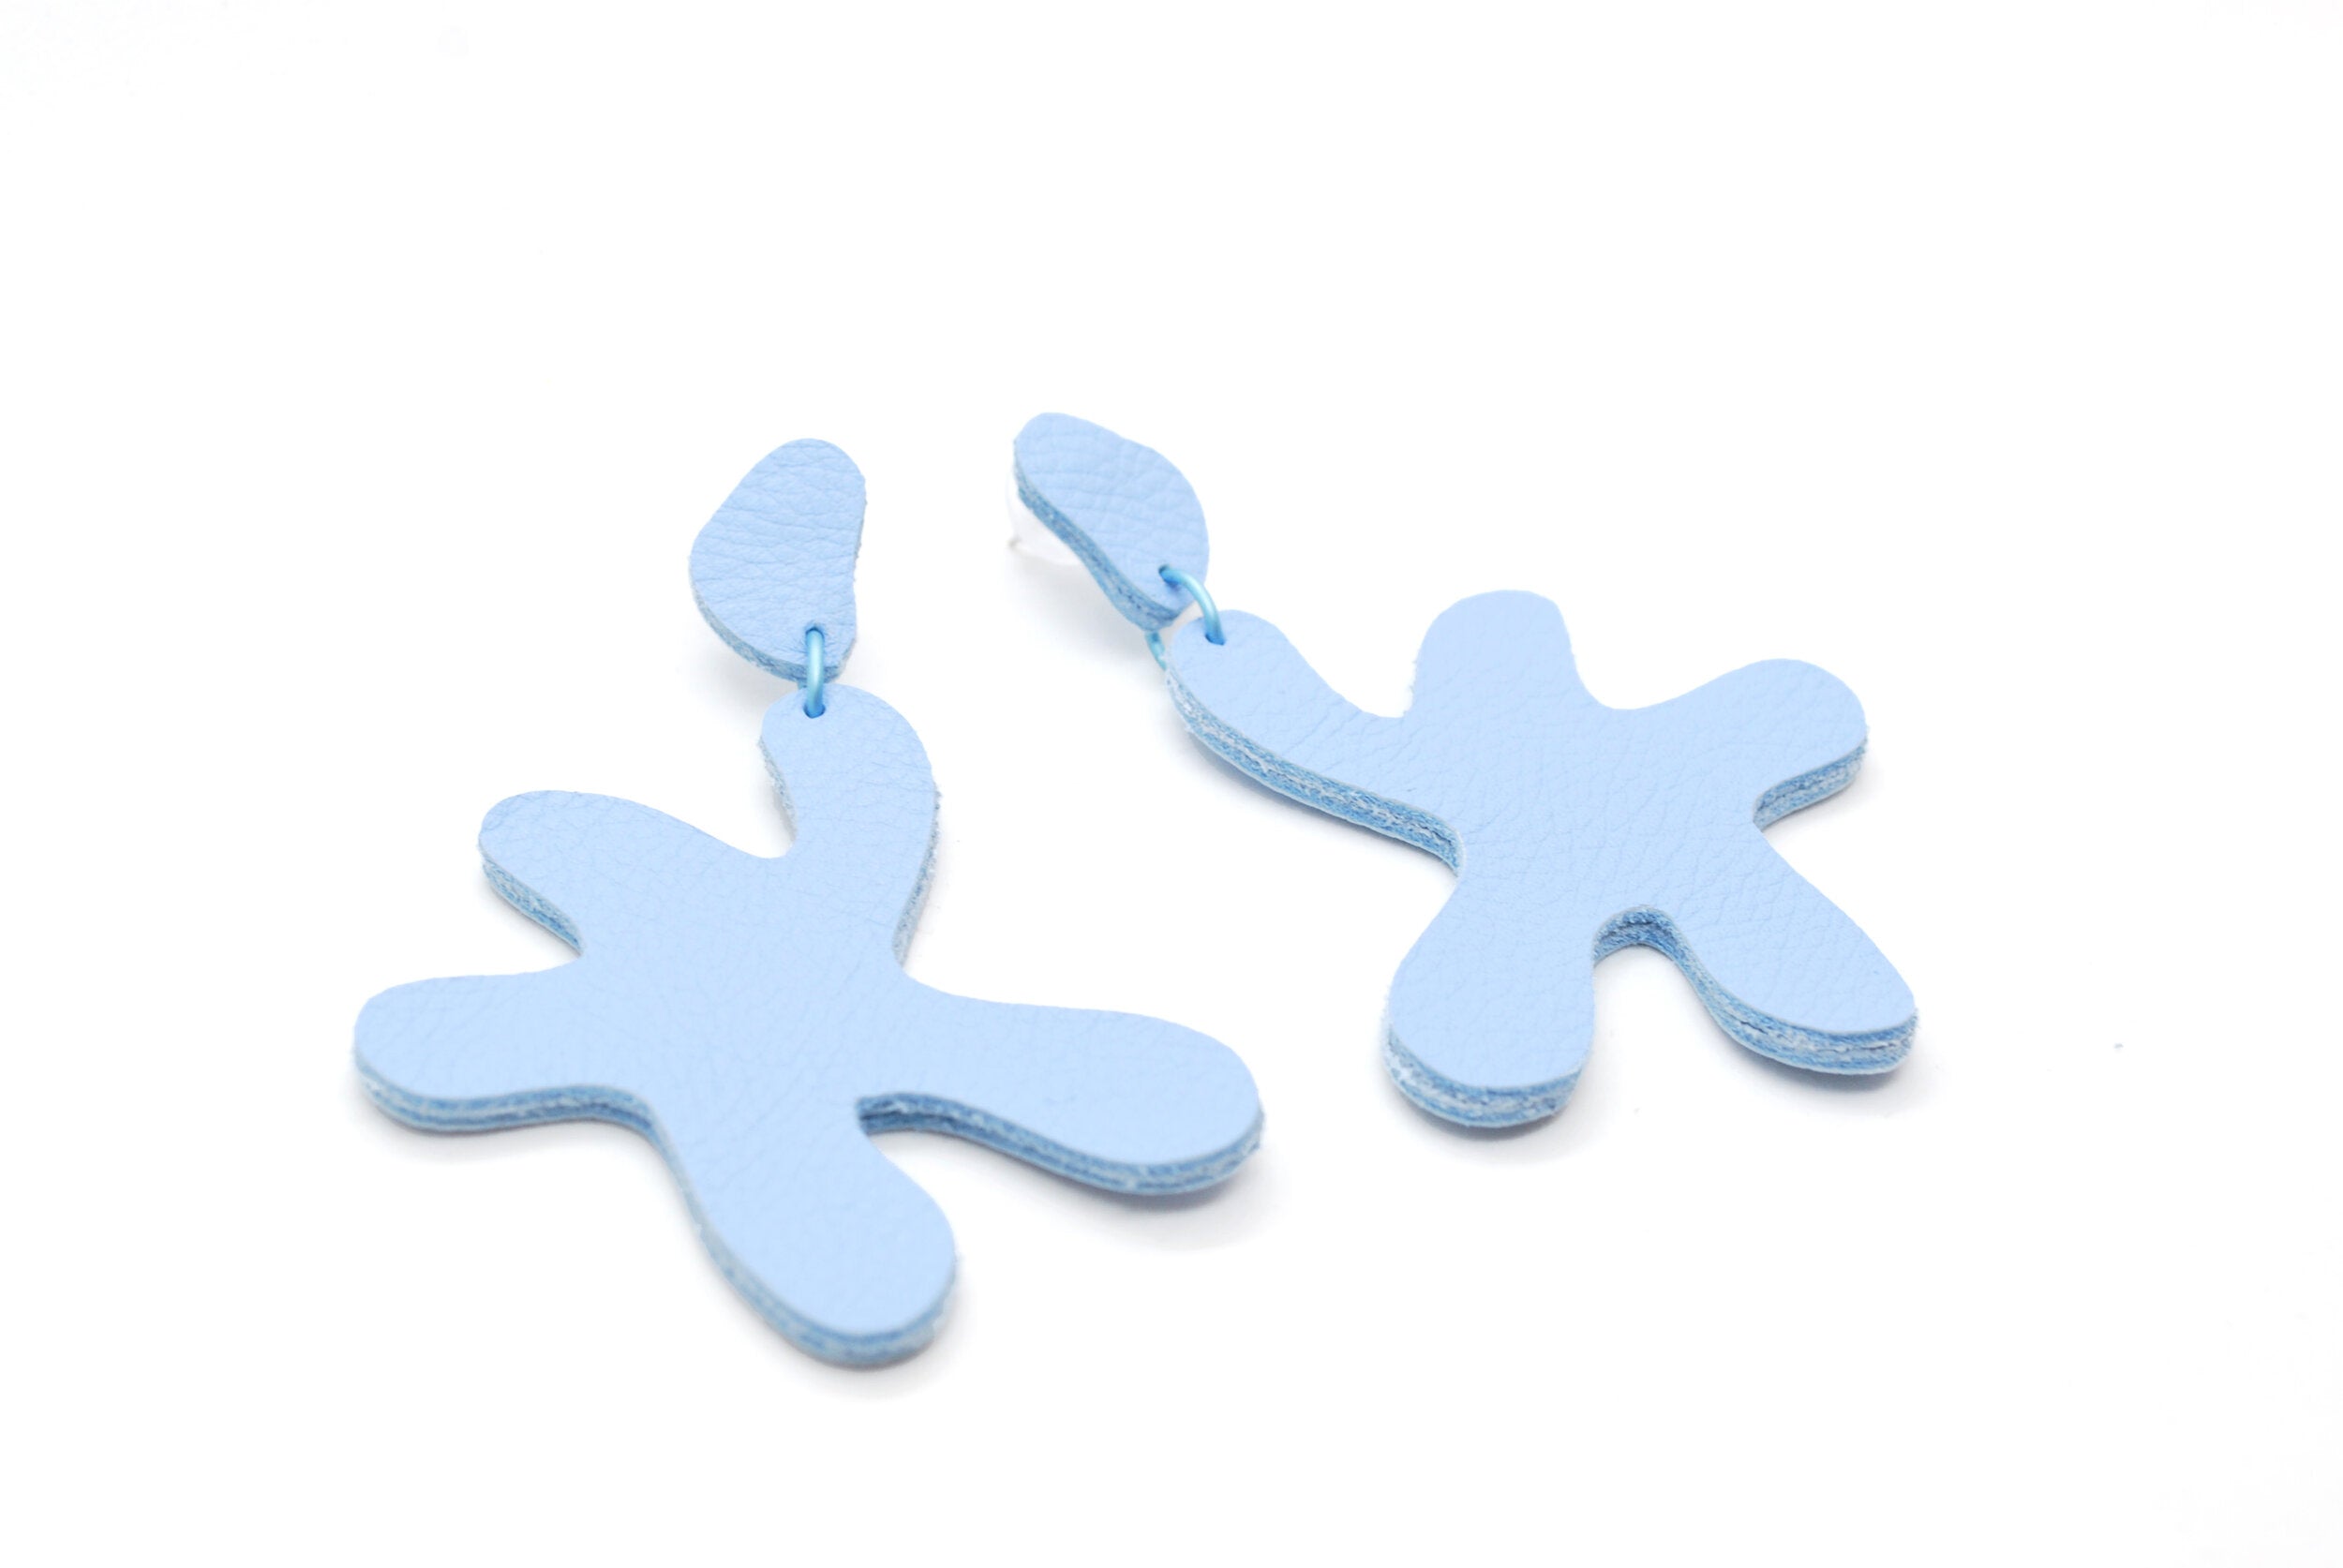 sky blue leather earrings made of cutout organic shapes and anodized aluminum jump rings.